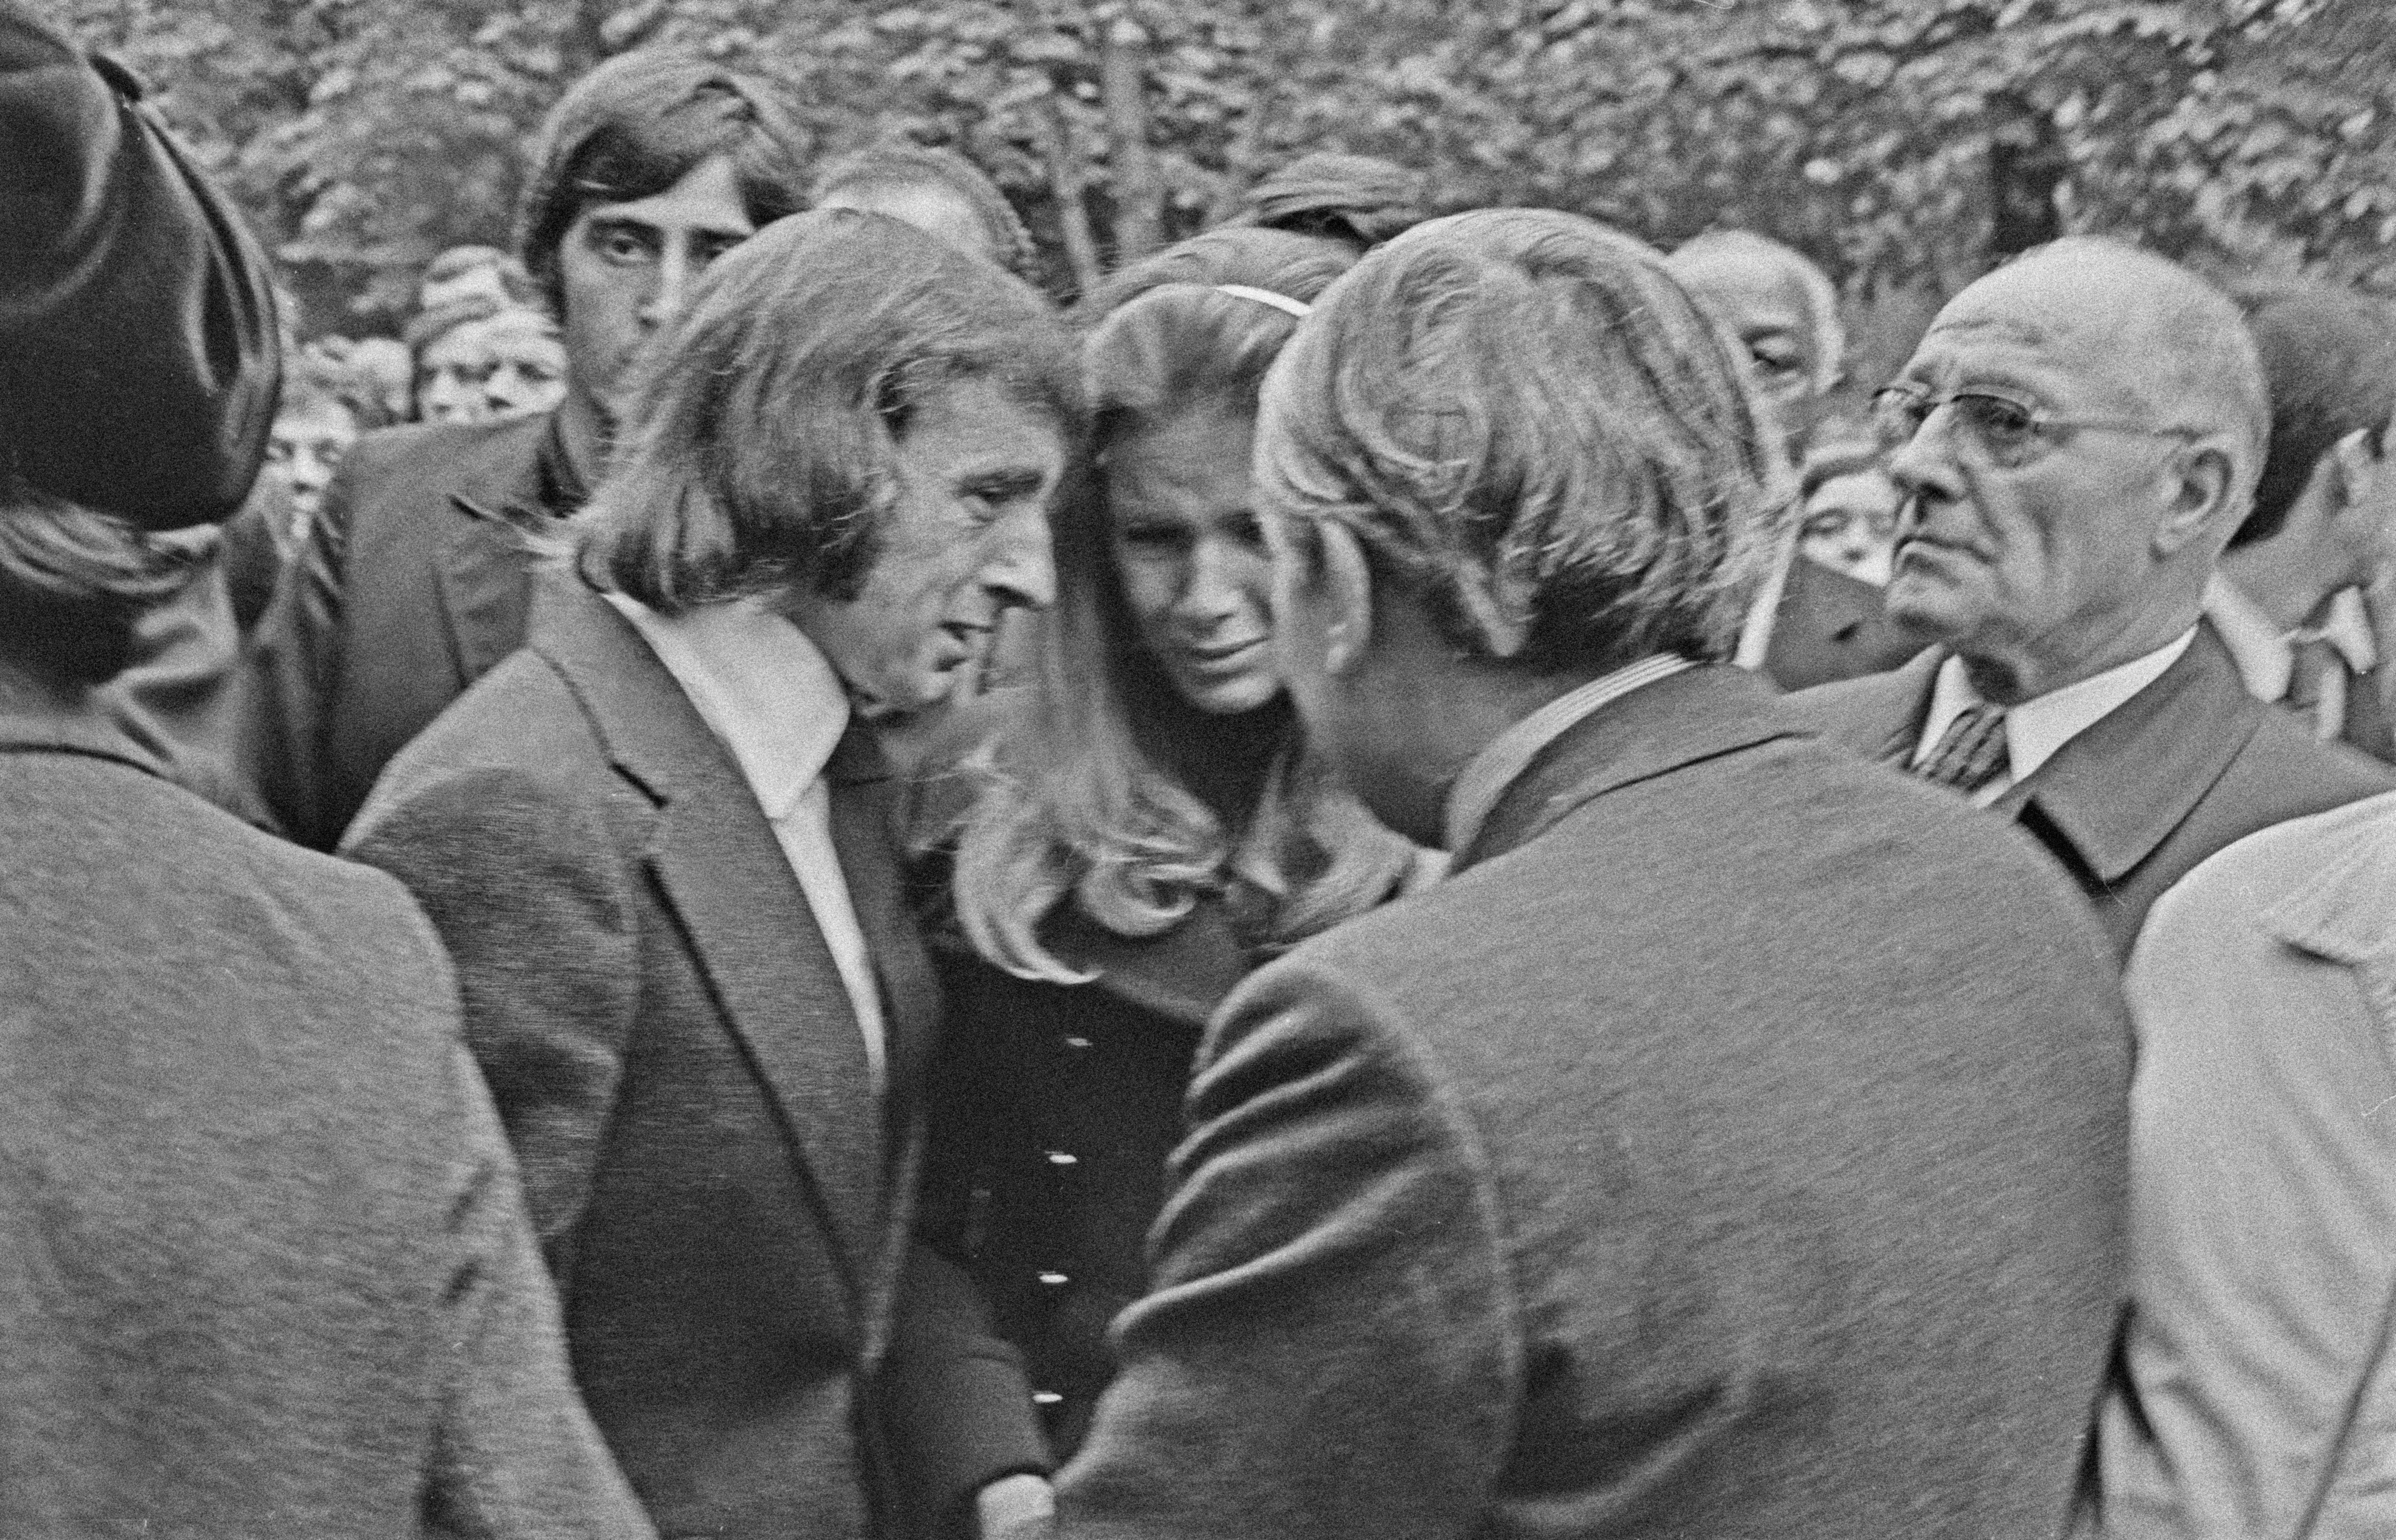 Stewart with his wife, Helen, at Francois Cevert’s funeral in October 1973